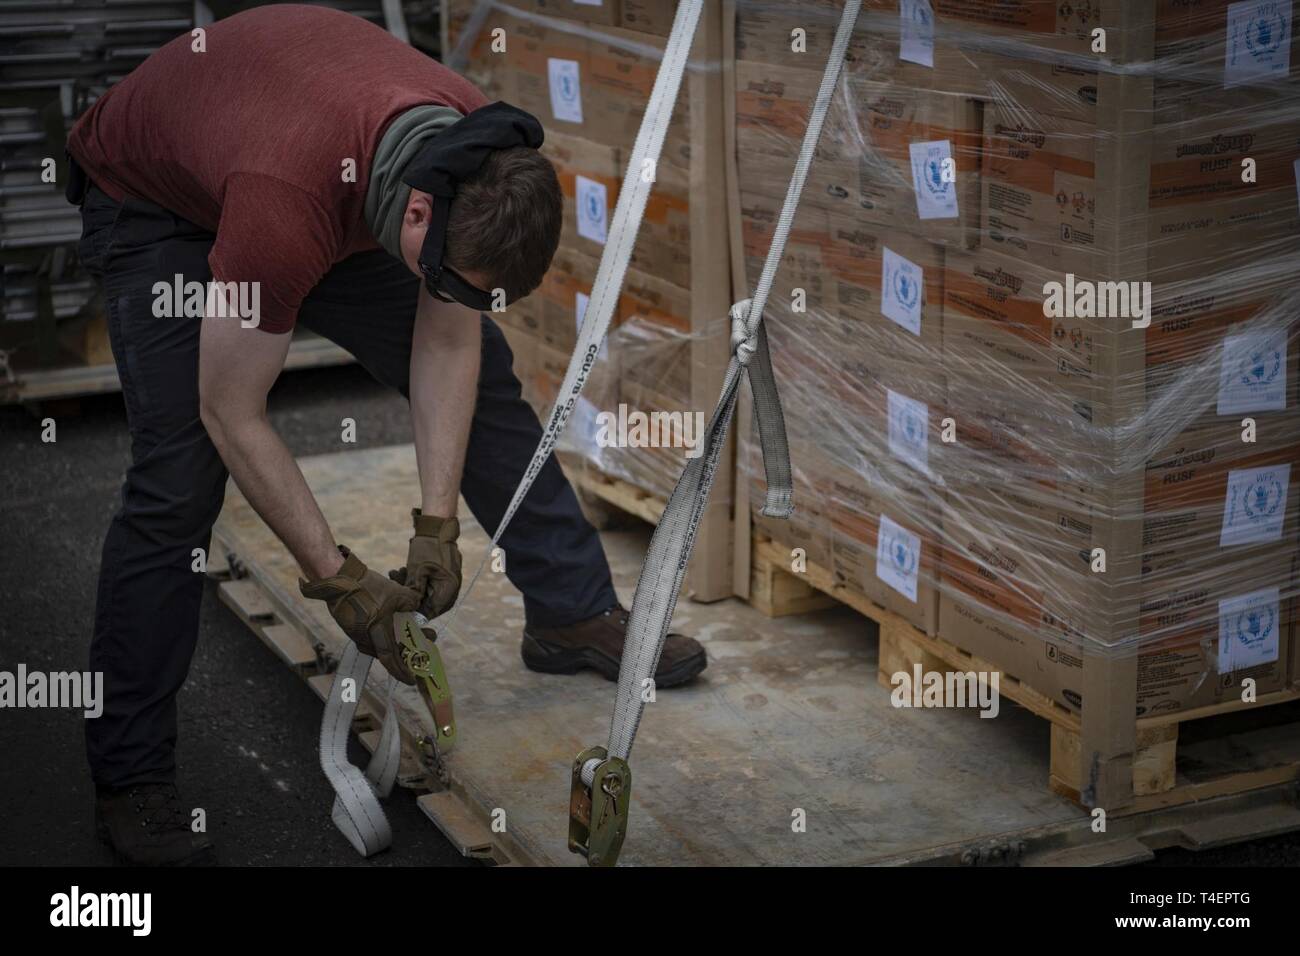 A U.S. military member supporting Combined Joint Task Force-Horn of Africa uses a ratchet strap to secure Plumpy Sup Aid to a pallet in Maputo, Mozambique, April 2, 2019. The task force is helping meet requirements identified by the United States Agency for International Development (USAID) assessment teams and humanitarian organizations working in the region by providing logistics support and manpower to USAID at the request of the Government of the Republic of Mozambique. Stock Photo